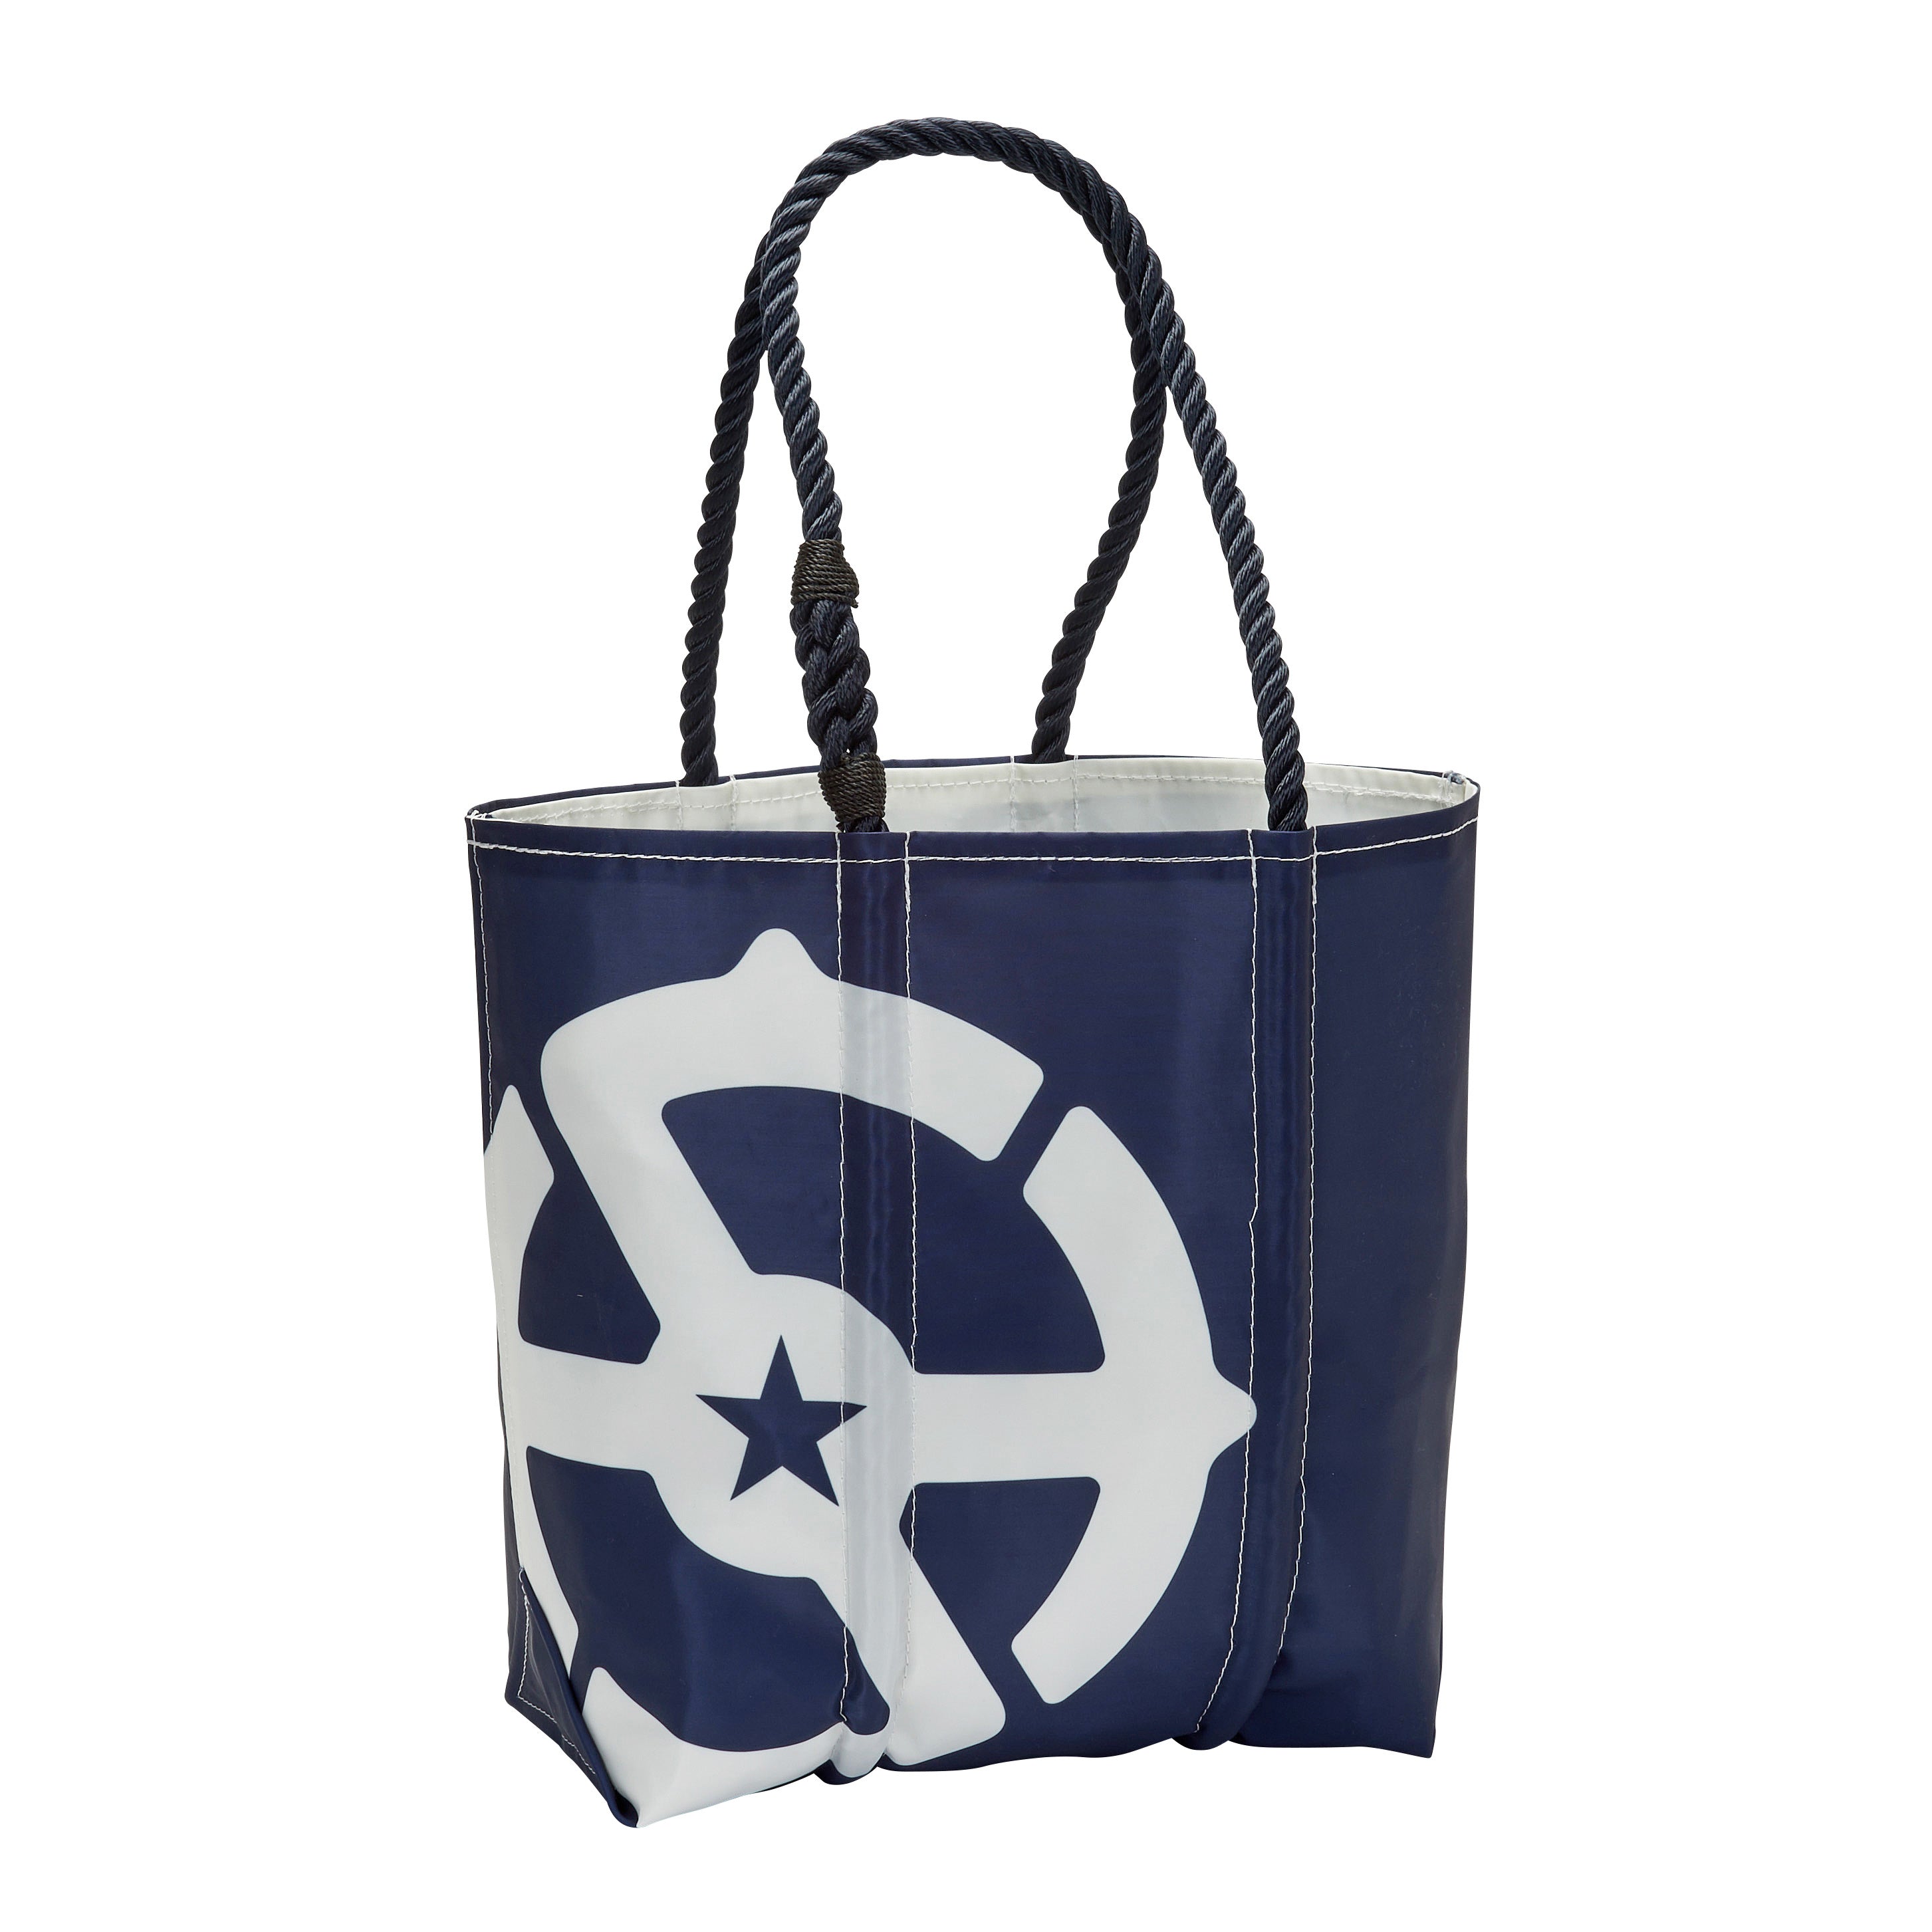 Medium Recycled Sail Tote by Sea Bags